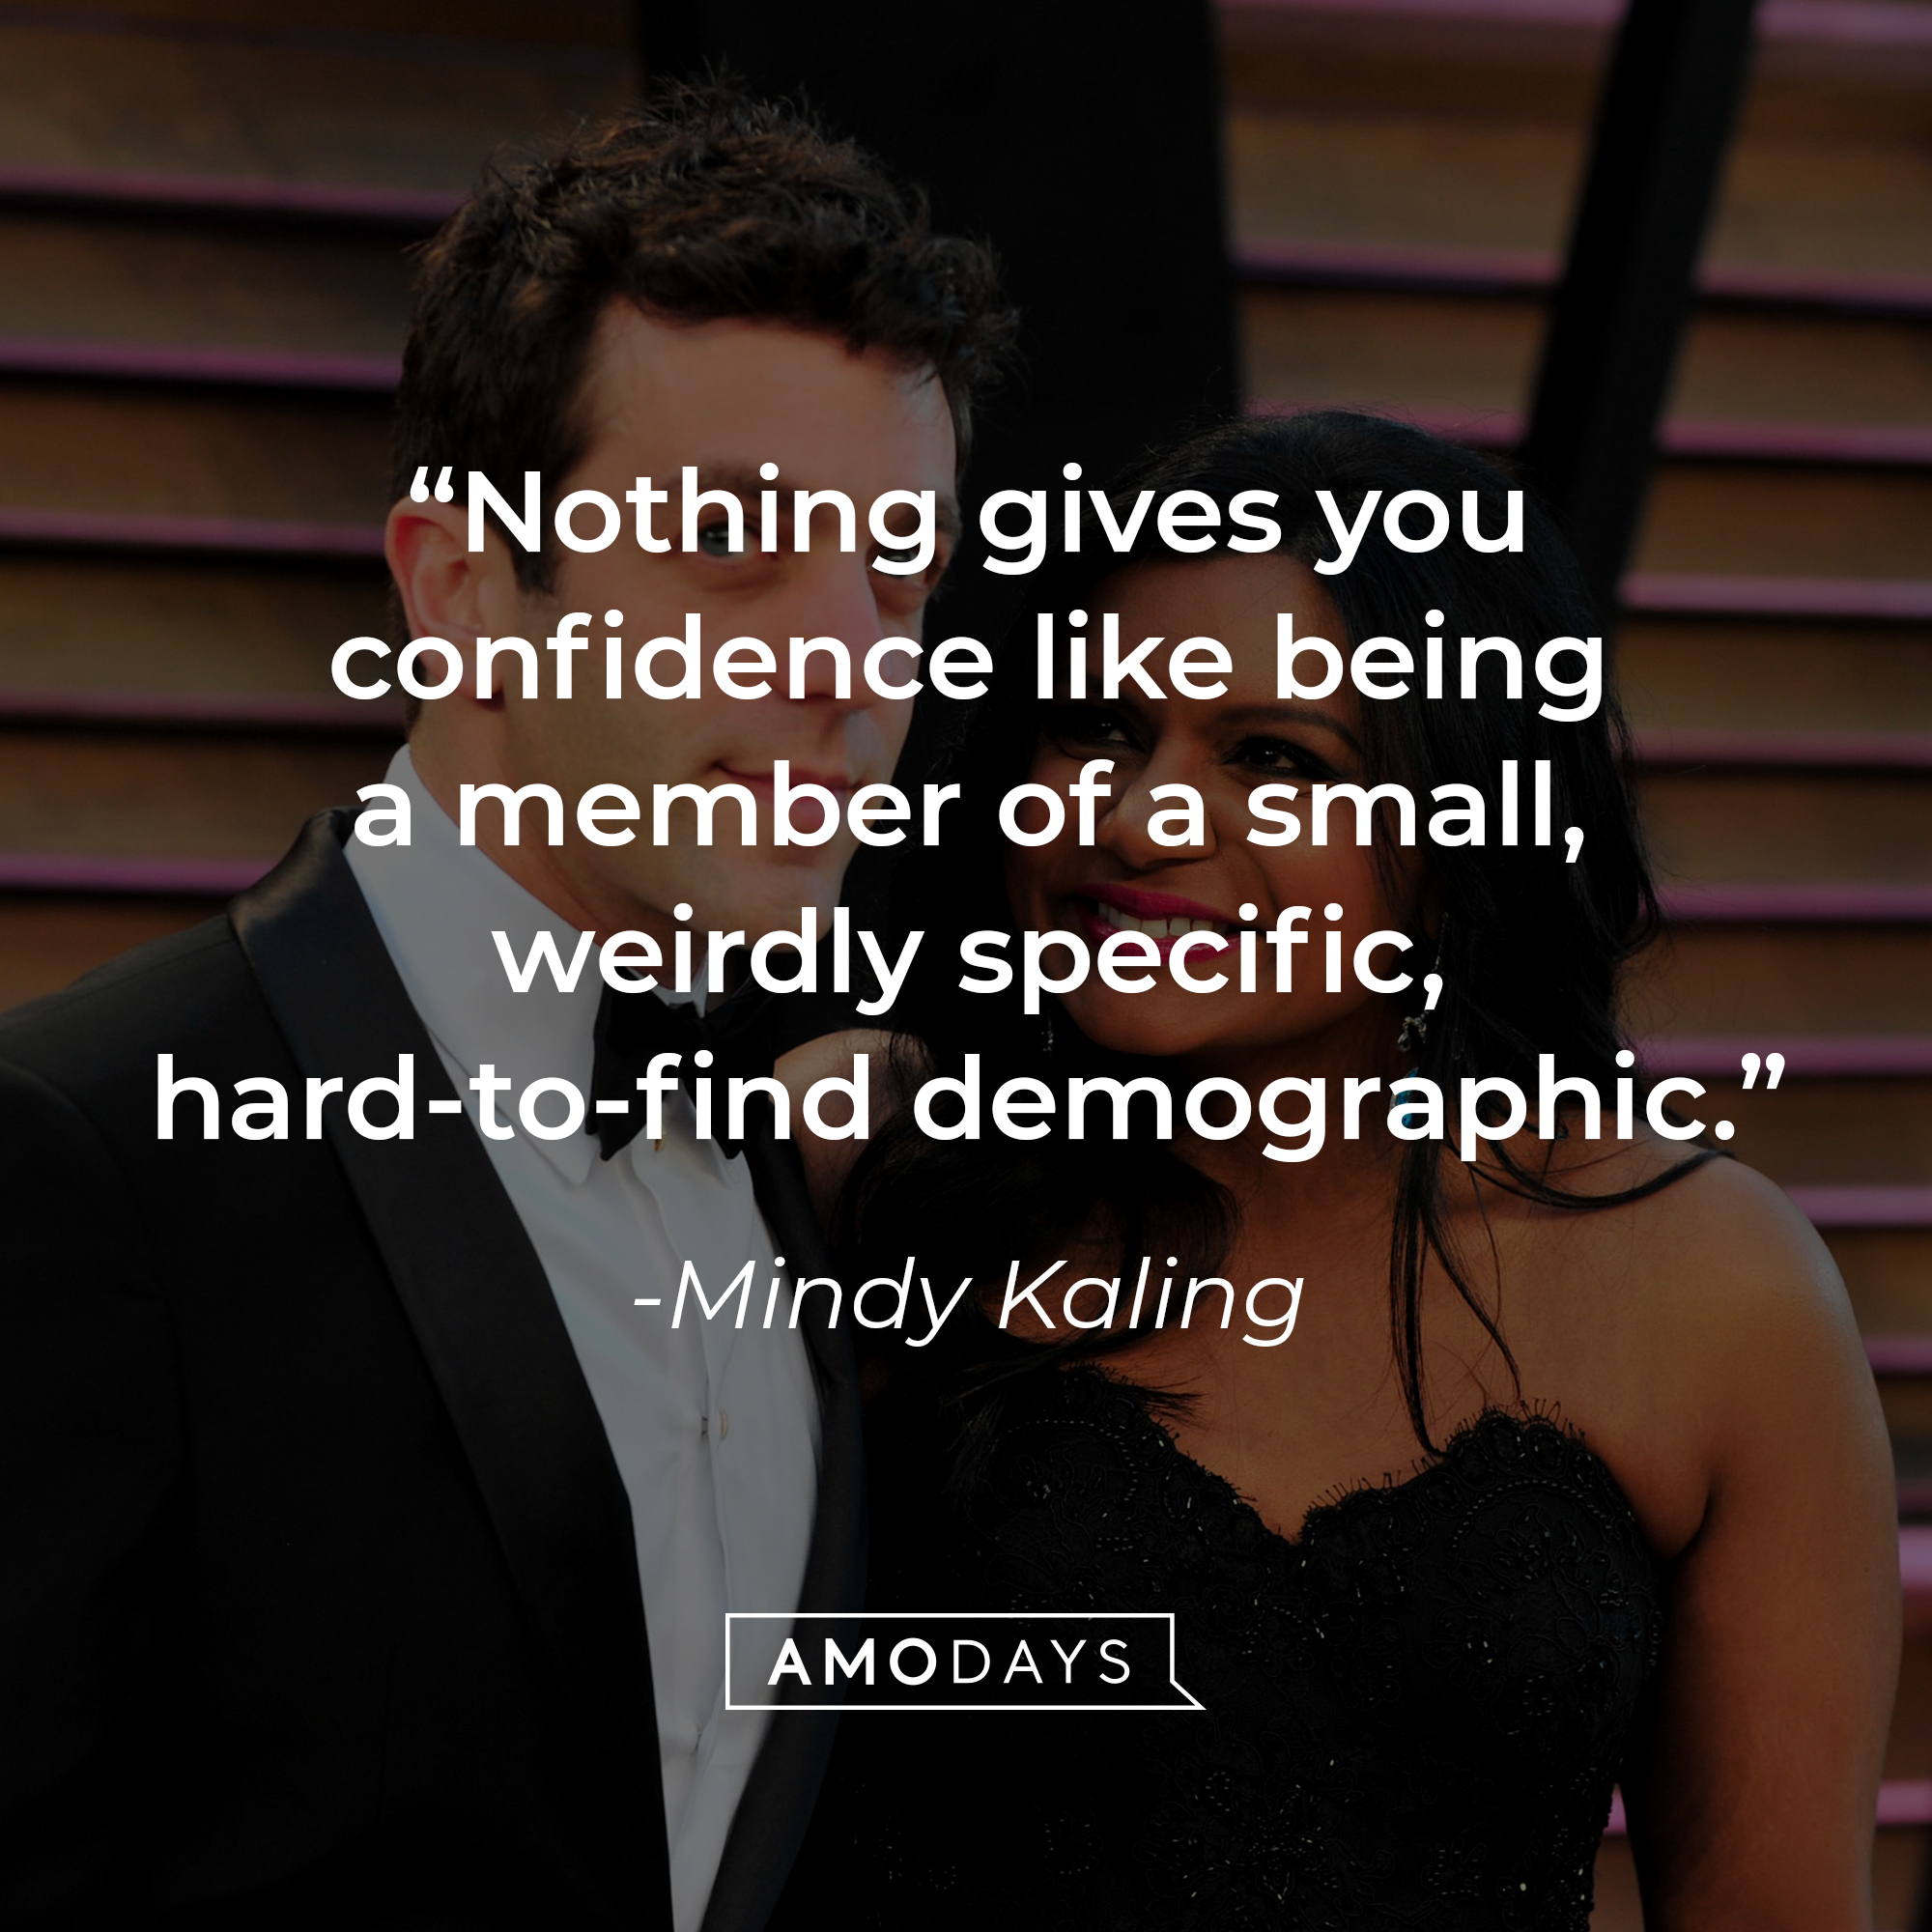 Mindy Kaling's quote: "Nothing gives you confidence like being a member of a small, weirdly specific, hard-to-find demographic." | Source: Getty Images